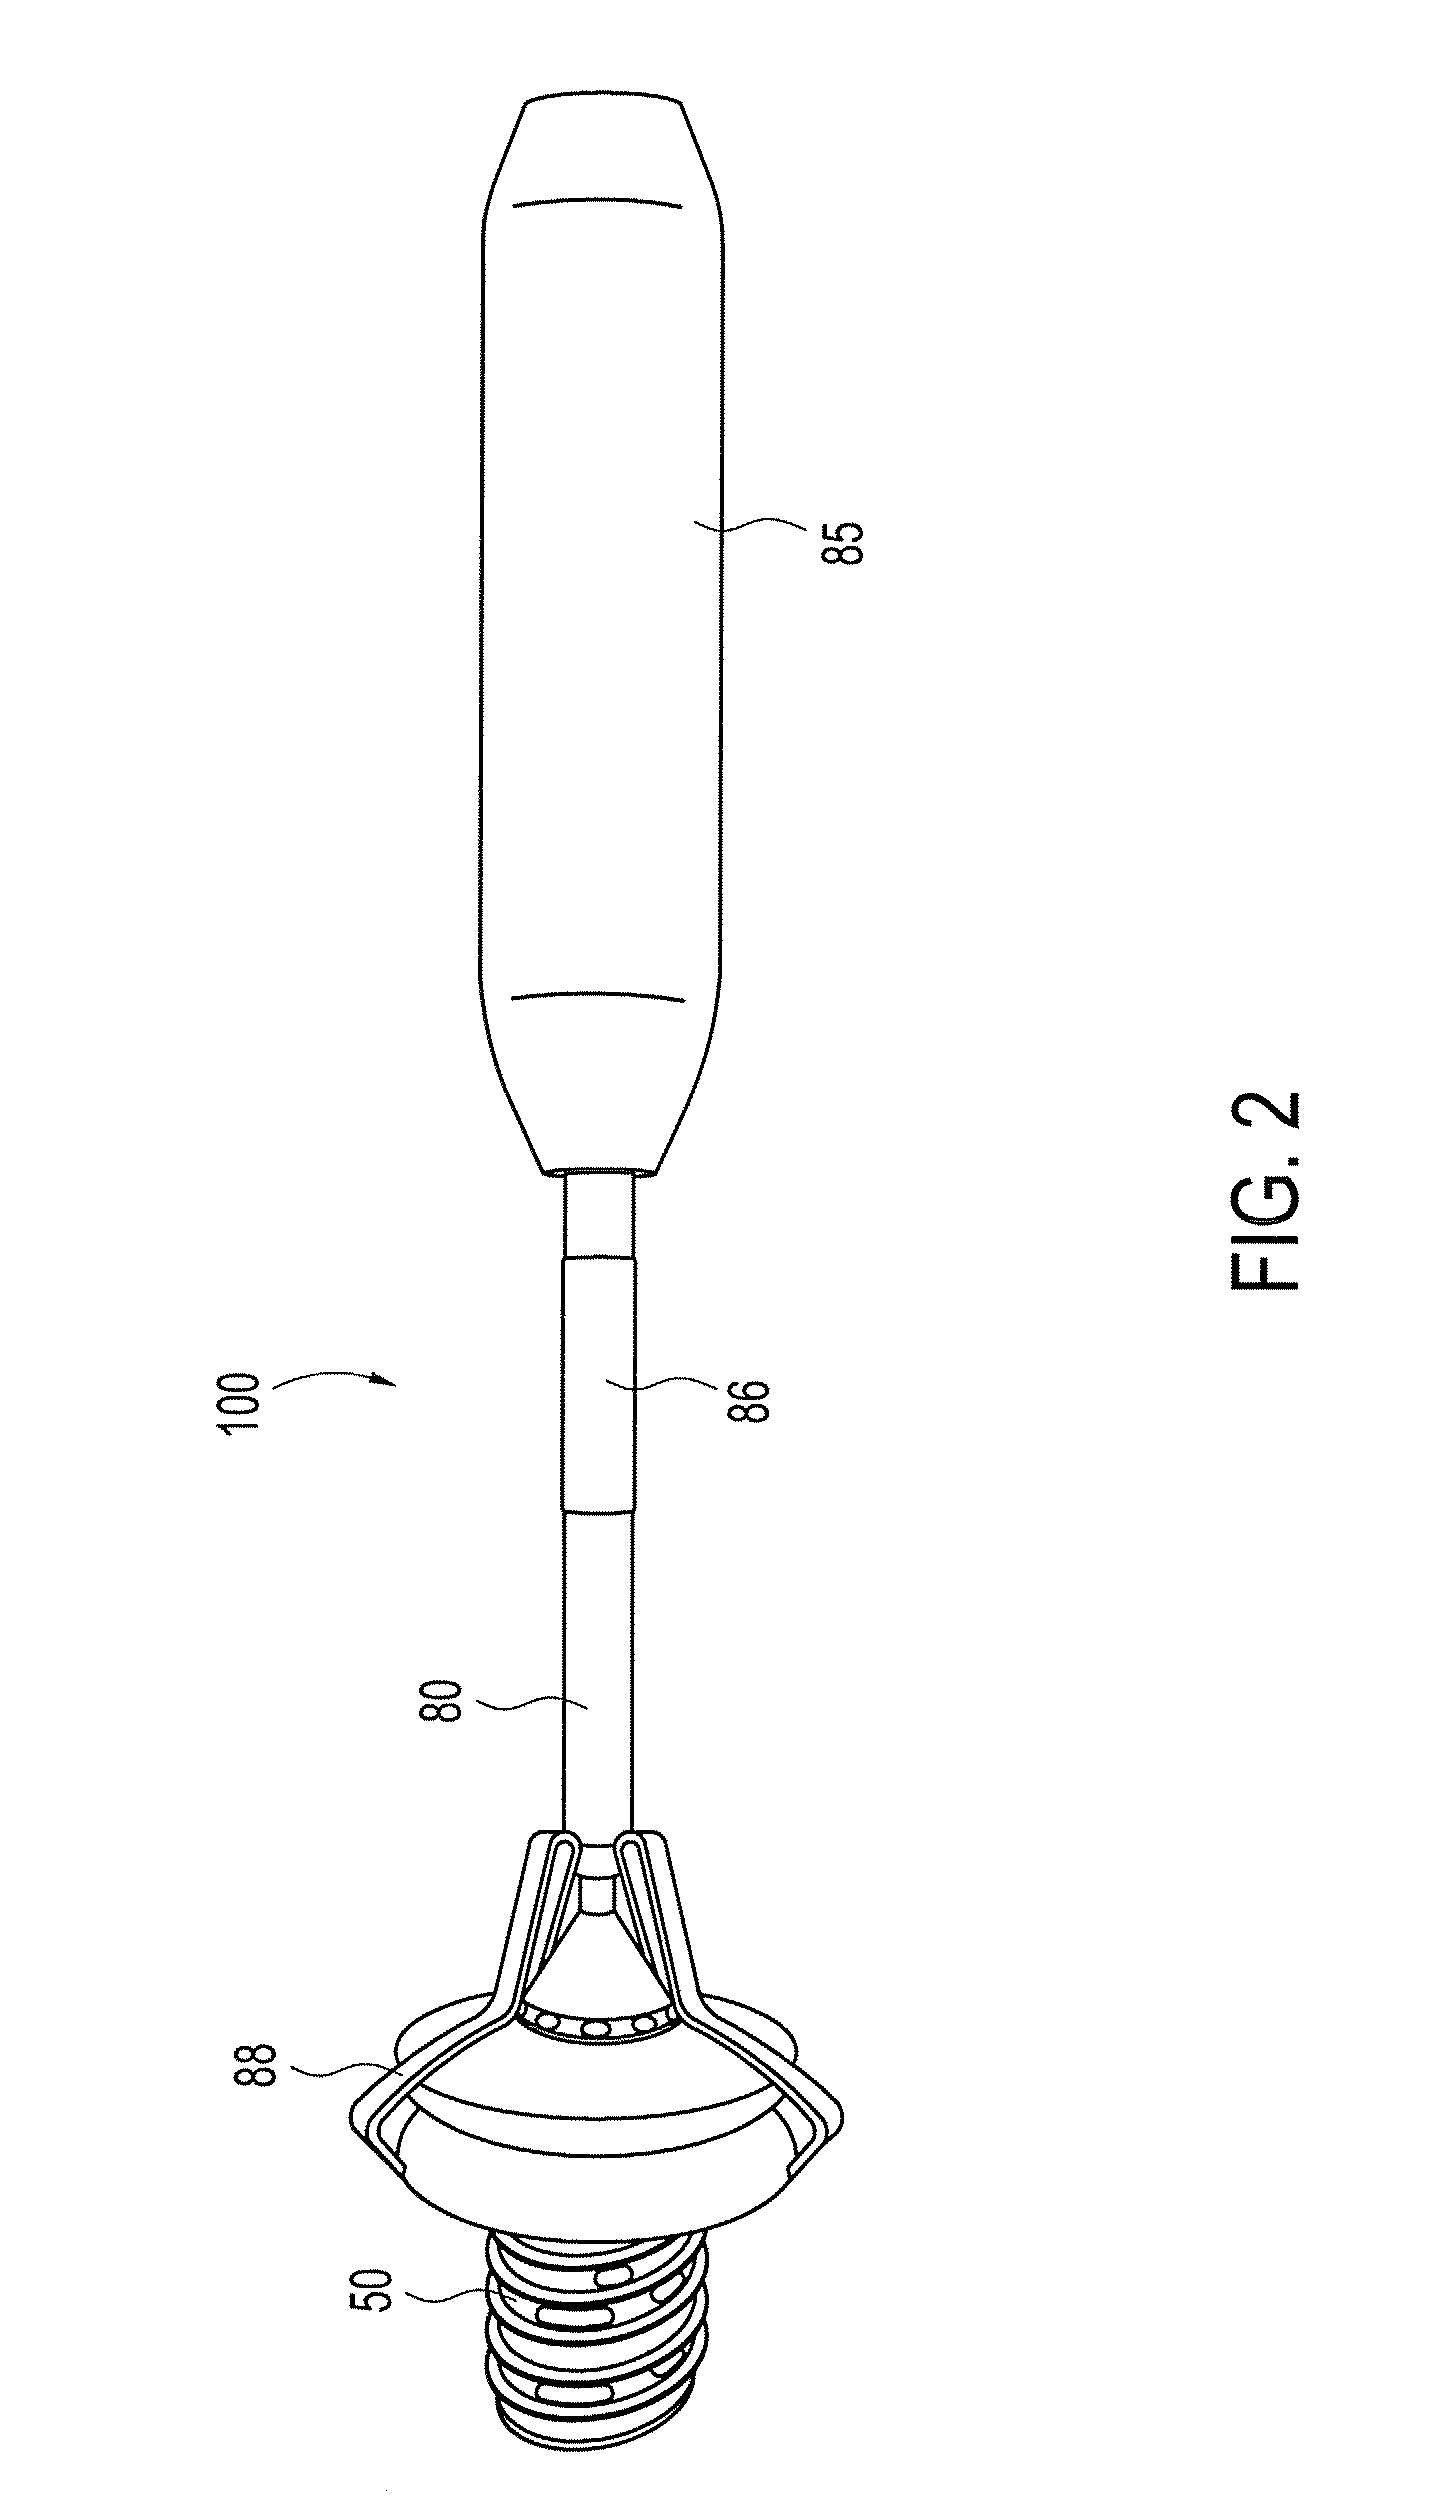 Dome shaped implant and inserter